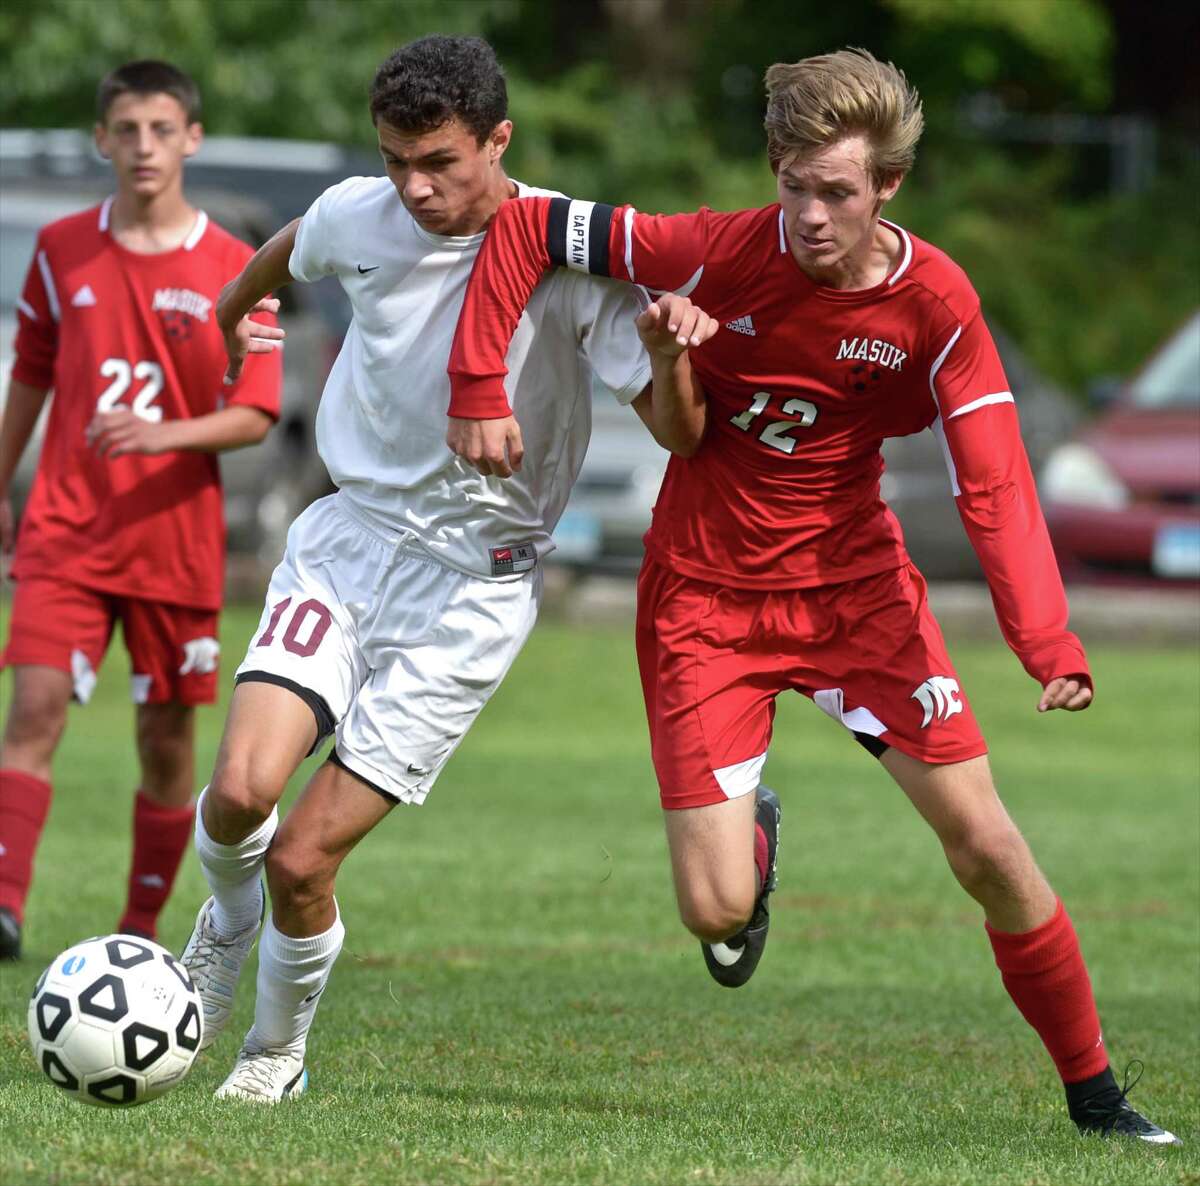 FILE PHOTO: Bethel's Frank Musser (10) and Masuk's Michael Snajder (12) battle for the ball in the boys high school soccer game between Masuk and Bethel high schools on Saturday, September 26, 2015, at Rourke Field, in Bethel, Conn.